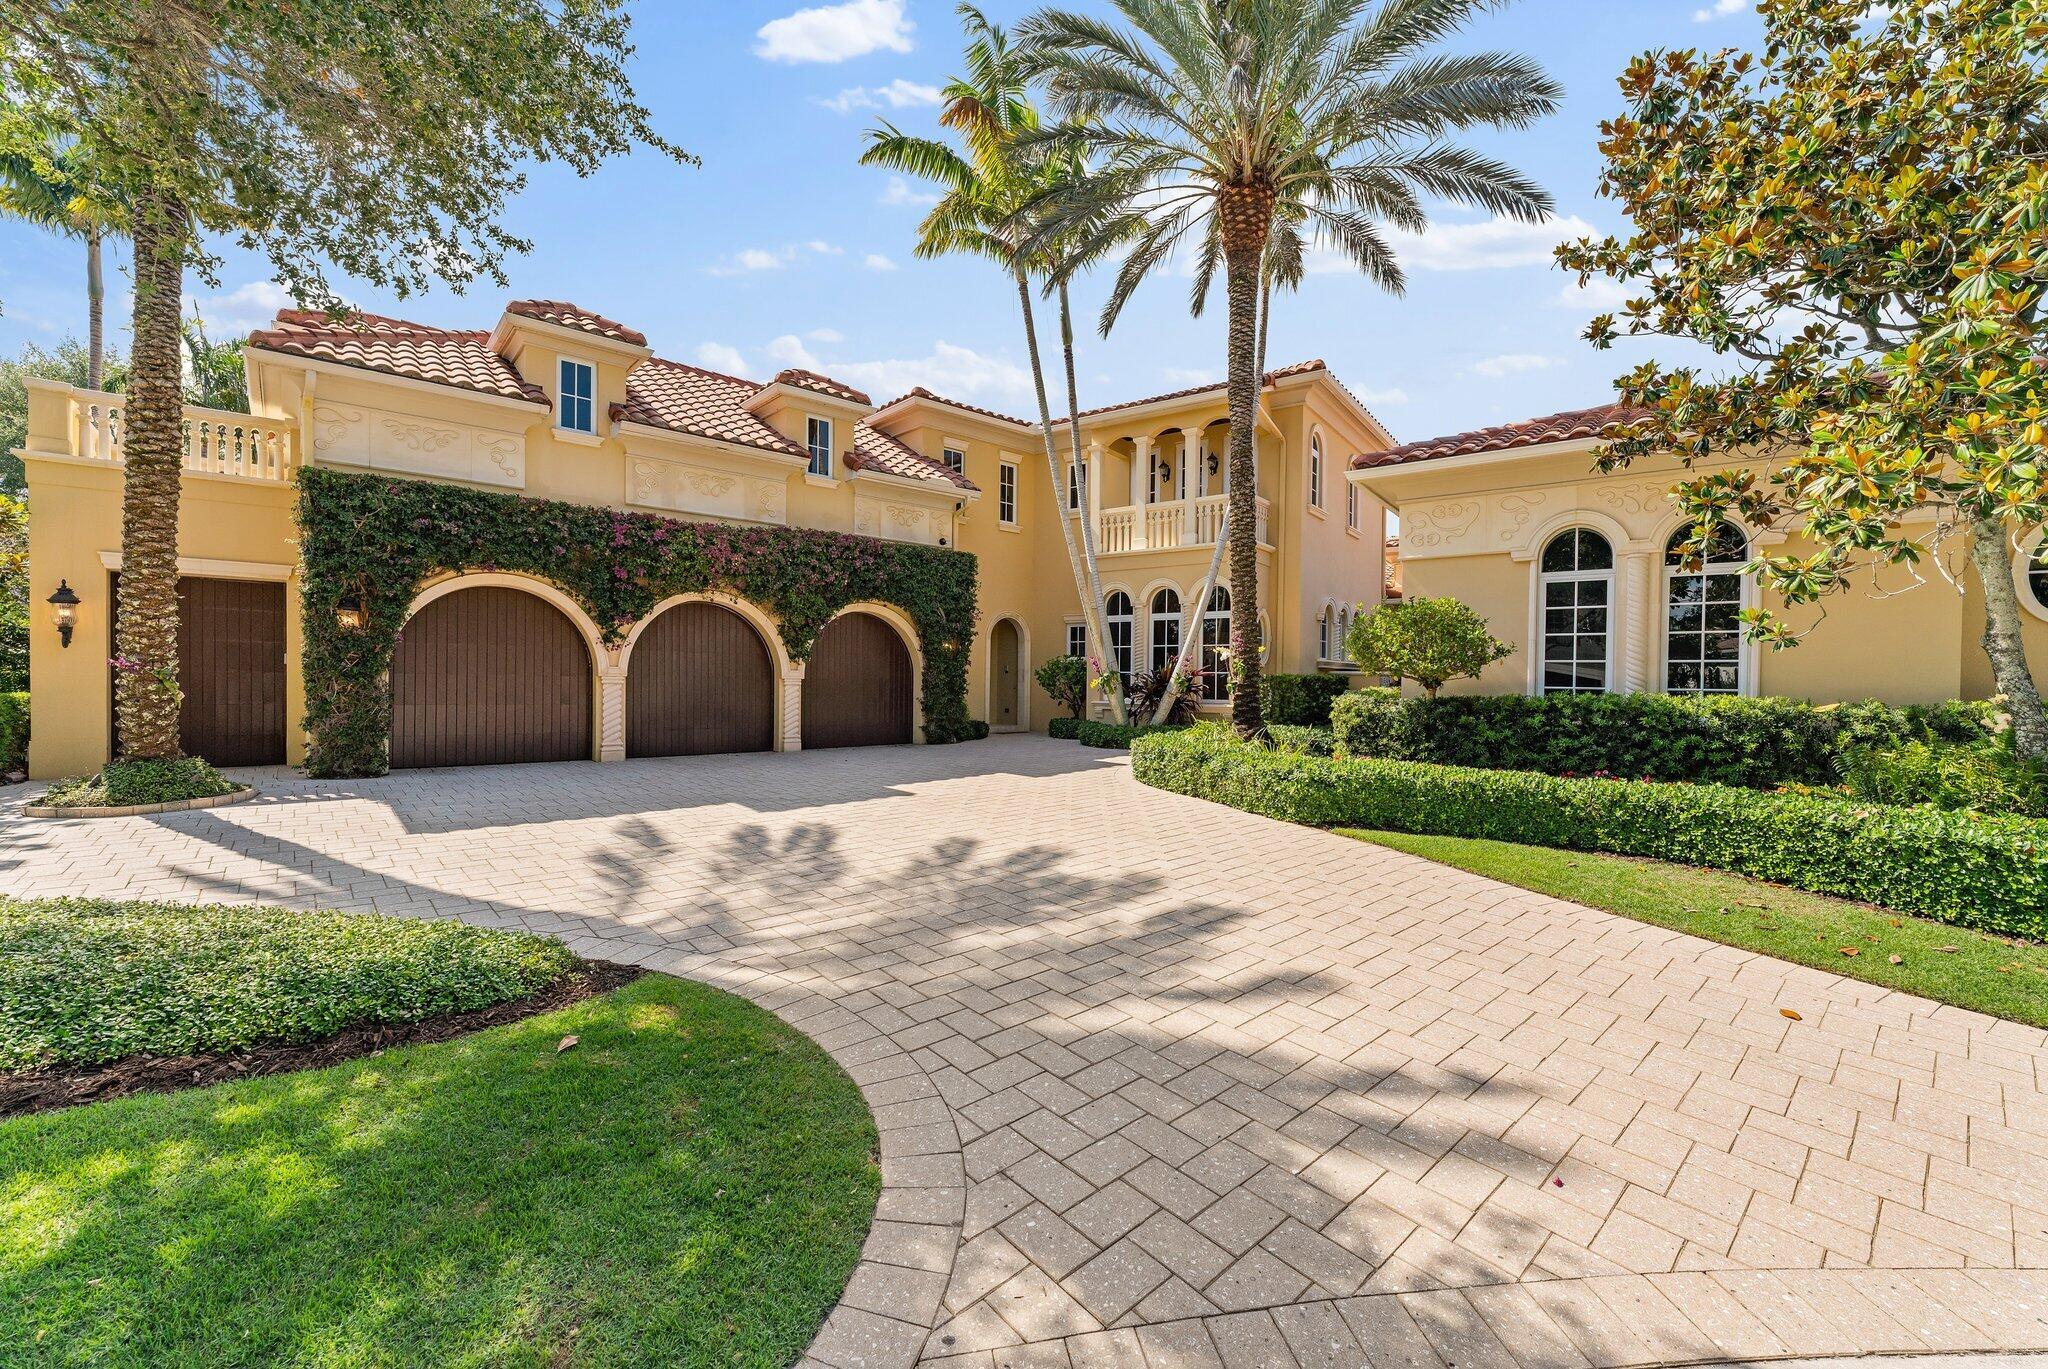 Welcome to this beautiful, Tuscan style home that offers the perfect blend of luxury, functionality, and sophistication. This grand family home is situated on 1/3 of an acre lot, earning it to be the largest home and lot in the Golf Estates of Old Palm Golf Club. The 6 bedroom estate is a true gem located on a cul-de-sac surrounded by lush and private landscaping. Upon arriving you'll find the bountiful bougainvilleas outlining the 3.5 car garage outfitted with two lifts for the car enthusiast. As you approach the mahogany front doors, you'll pass the colorful orchids and tranquil water feature. Arriving into the foyer you'll be comfortably seated at the newly added wet bar area with quartzite countertops, uplighting, refrigerator, ice maker, and ample cabinets and shelving. (continued) The open floor plan showcases 13 ft coffered ceilings as it continues from the bar area to the living room. The state-of-the-art kitchen is equipped with top-of-the-line appliances and a convenient butler's pantry. 
Step outside and discover a summer kitchen, perfect for hosting unforgettable gatherings and situated on your own private water feature, perfect for al fresco dining.  A newly resurfaced pool, cabana bath, built-in speakers, and flourishing mango tree that elevates the home's environment. This property is equipped with a whole house generator, ensuring uninterrupted power supply. 
In total, this stunning estate offers six bedrooms, each thoughtfully designed to provide comfort and privacy. 
From its elegant finishes to its well-appointed spaces, this residence is spacious and perfect for the whole family with extra room for inlaws or nanny. Impact glass throughout and A/C zones, allowing for optimal temperature control and energy efficiency throughout the home's generous 6,470 square feet of living space. The master suite exudes tranquility and zen with abundant windows for natural lighting while overlooking your own private oasis. The suite comes with two linen closets, his and her sinks, his and her closets.   The entire home has 8-zones of architectural speakers. The office has custom built-in cabinetry and offers a functional, stylish workspace.  Down the  hallway there is  a VIP room with  refrigerator, wet bar and cabinets providing a versatile area for various needs. This residence features an elevator near the mudroom and garage entrance. On the second floor, you'll find a spacious club room with a Blue Agate stone and  wet bar with a convection oven,  dishwasher, mini fridge, and ice maker. The second floor also includes a balcony, large temperature-controlled wine closet and bedroom with its own balcony, walk-in closet, and en-suite bathroom. 
Don't miss the opportunity to experience the grandeur and elegance of 11104 Green Bayberry Dr. 
Schedule your private tour today and discover the extraordinary lifestyle that awaits you!
Old Palm has an 18-hole championship golf course with a 19th bye hole completely re-designed by Raymond Floyd, a new completely renovated clubhouse (Jan 2024) with casita's, restaurant, cafe, fitness center, lap pool, mens and women's spa and pickle ball courts. 
If you are looking for an exclusive golf course and luxurious home in Palm Beach Gardens, Old Palm Golf Club is one of the most desired choices.